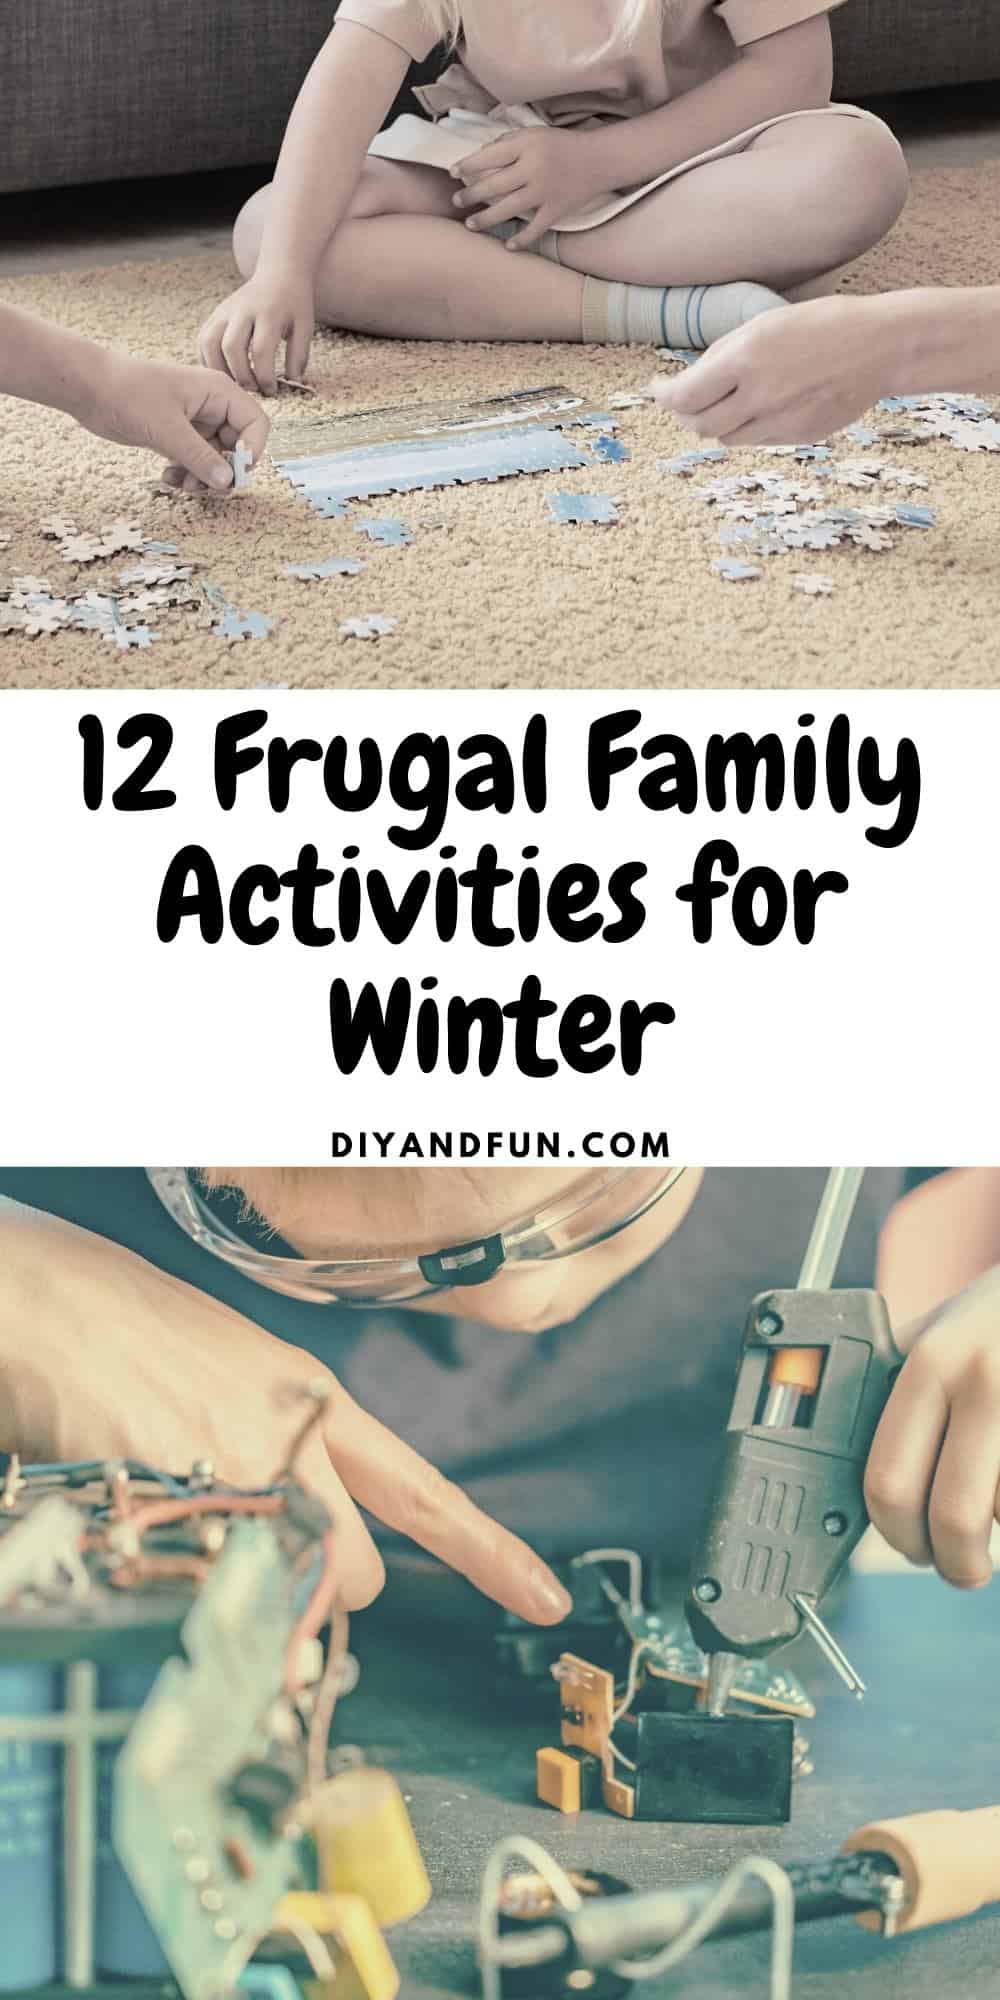 12 Frugal Family Activities for Winter, simple and inexpensive ideas for spending quality family time together when it is cold outside.